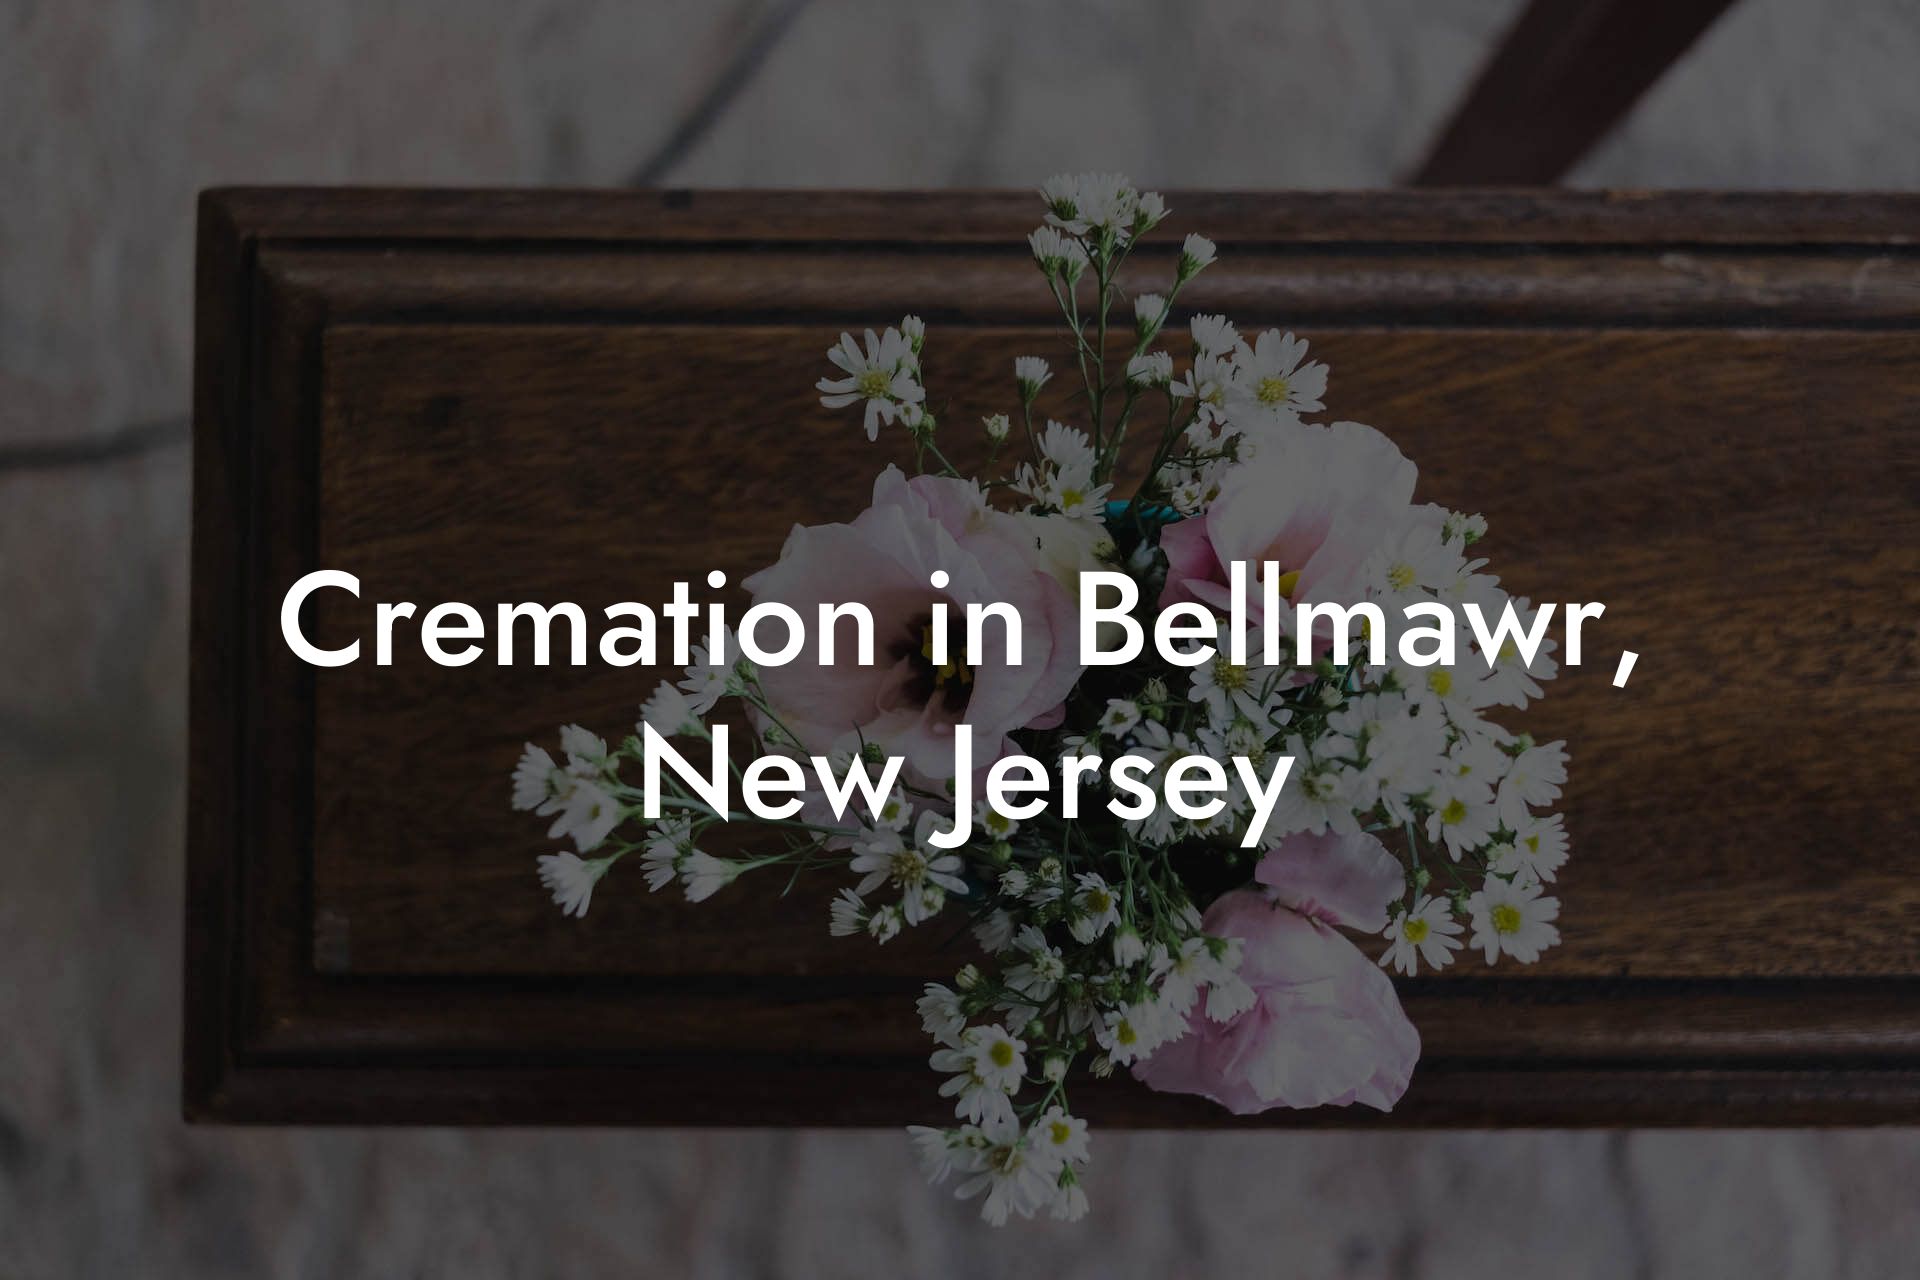 Cremation in Bellmawr, New Jersey